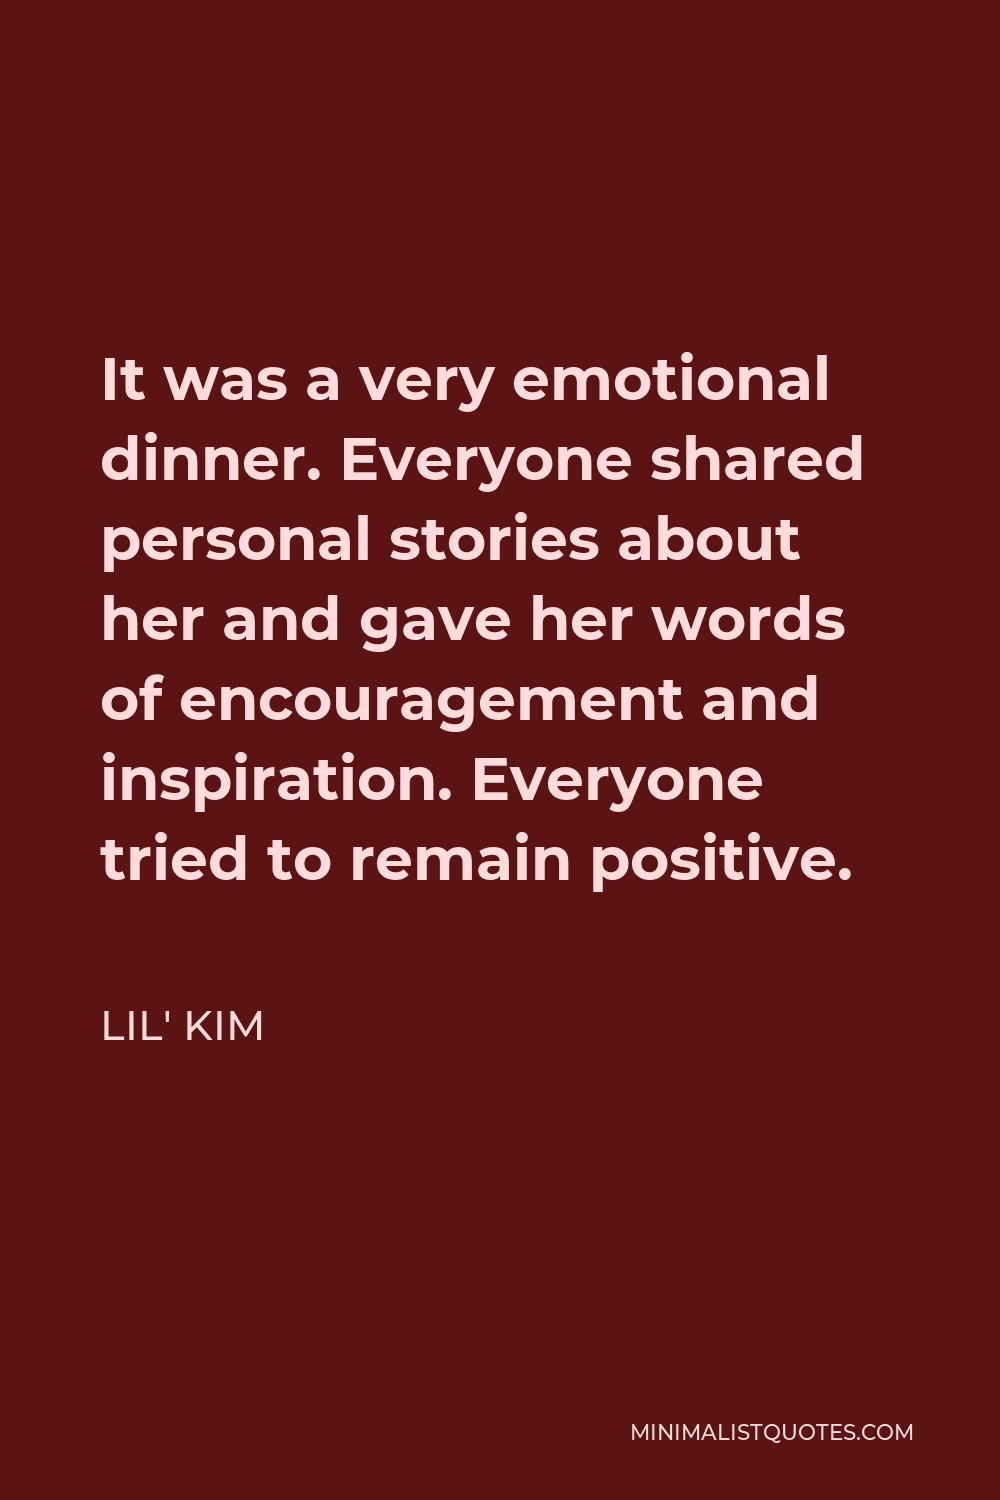 Lil' Kim Quote: It was a very emotional dinner. Everyone shared personal  stories about her and gave her words of encouragement and inspiration.  Everyone tried to remain positive.